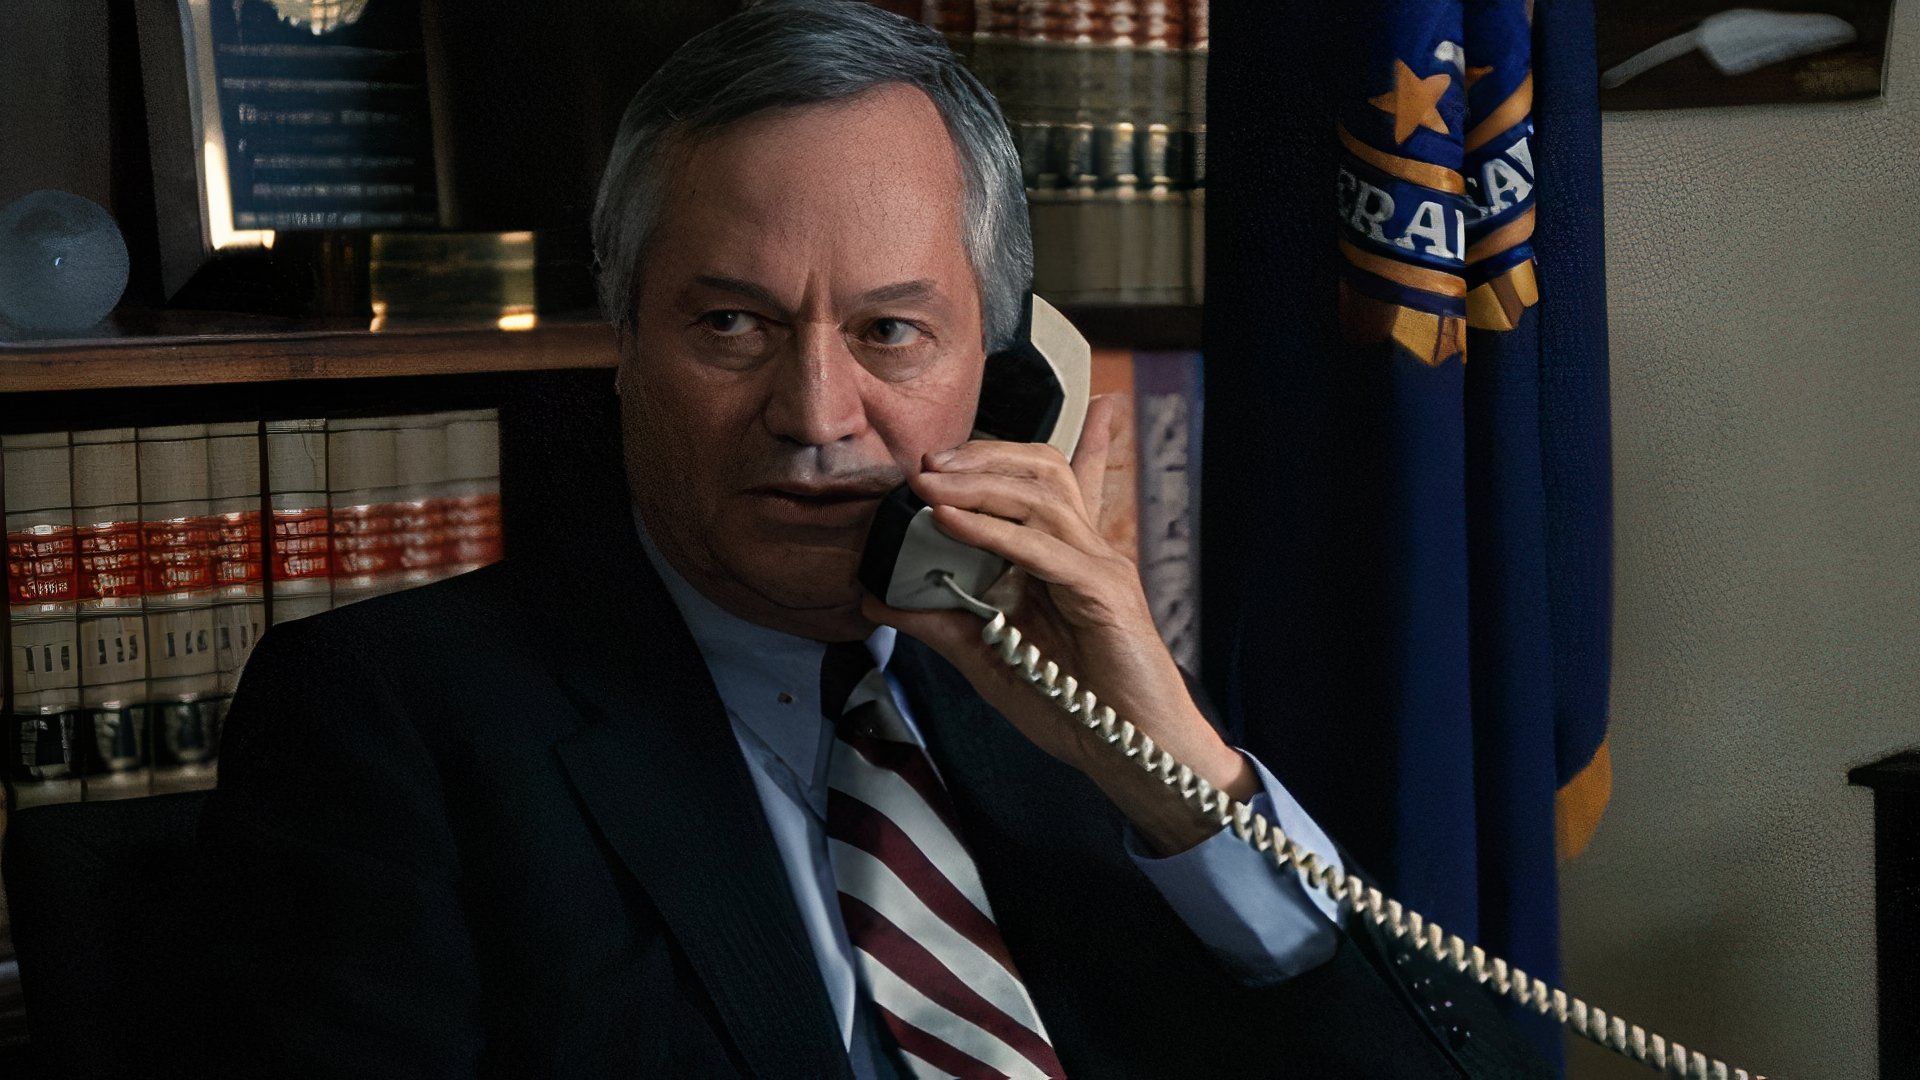 Roger Corman on the phone in Silence of the Lambs movie